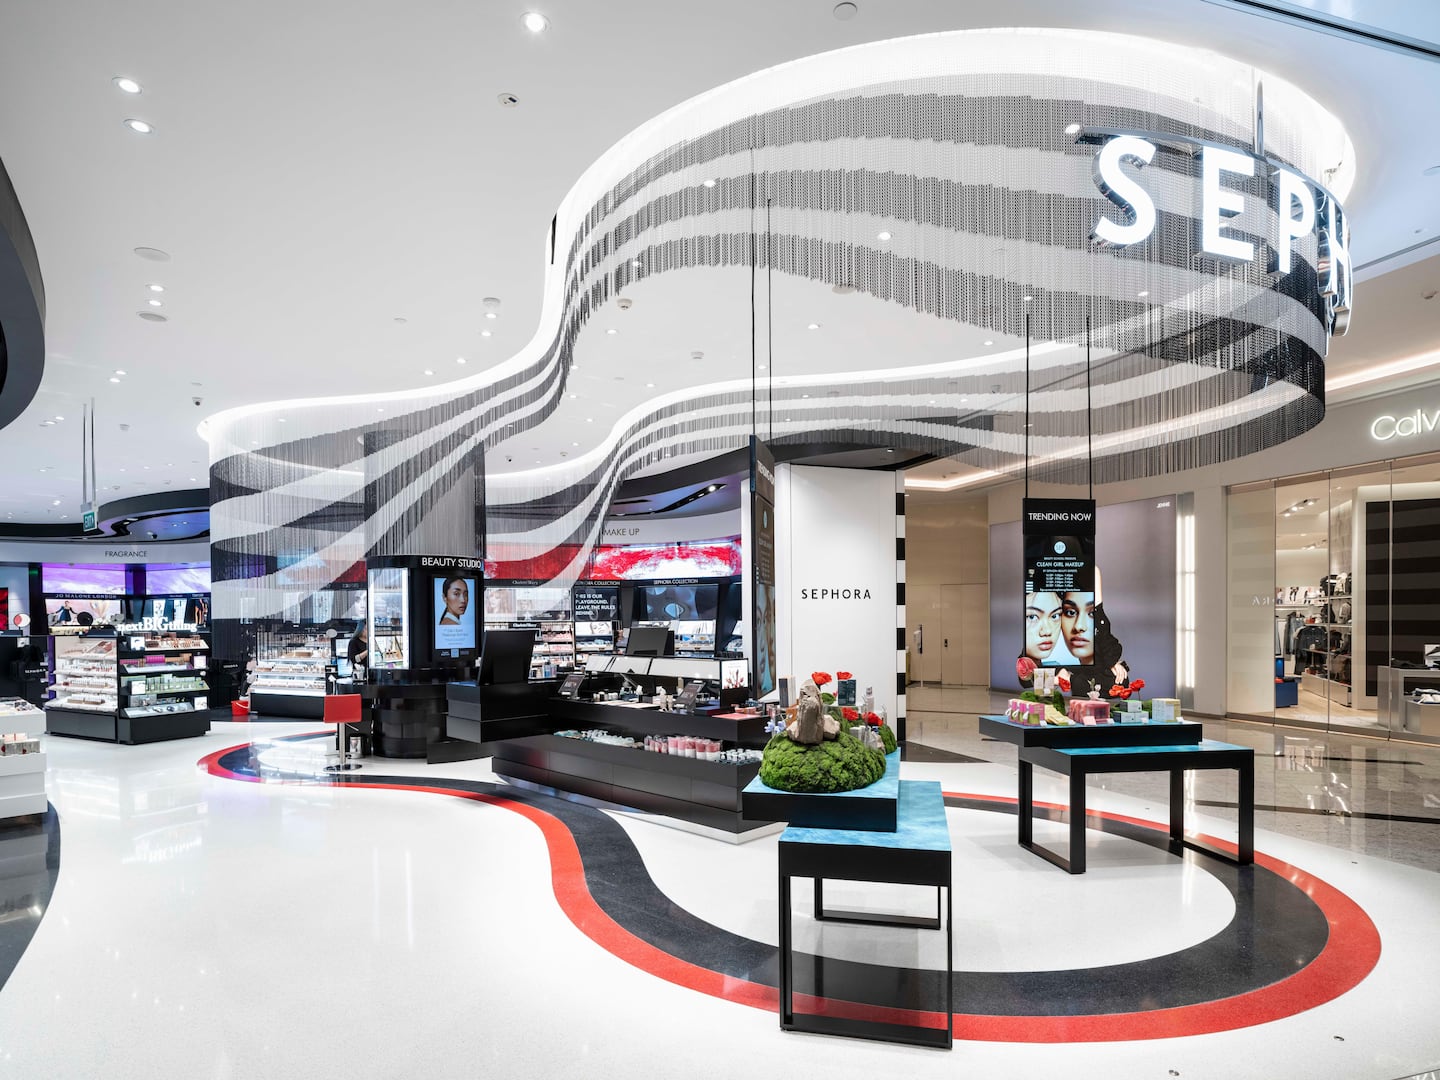 A Sephora store in a mall in India